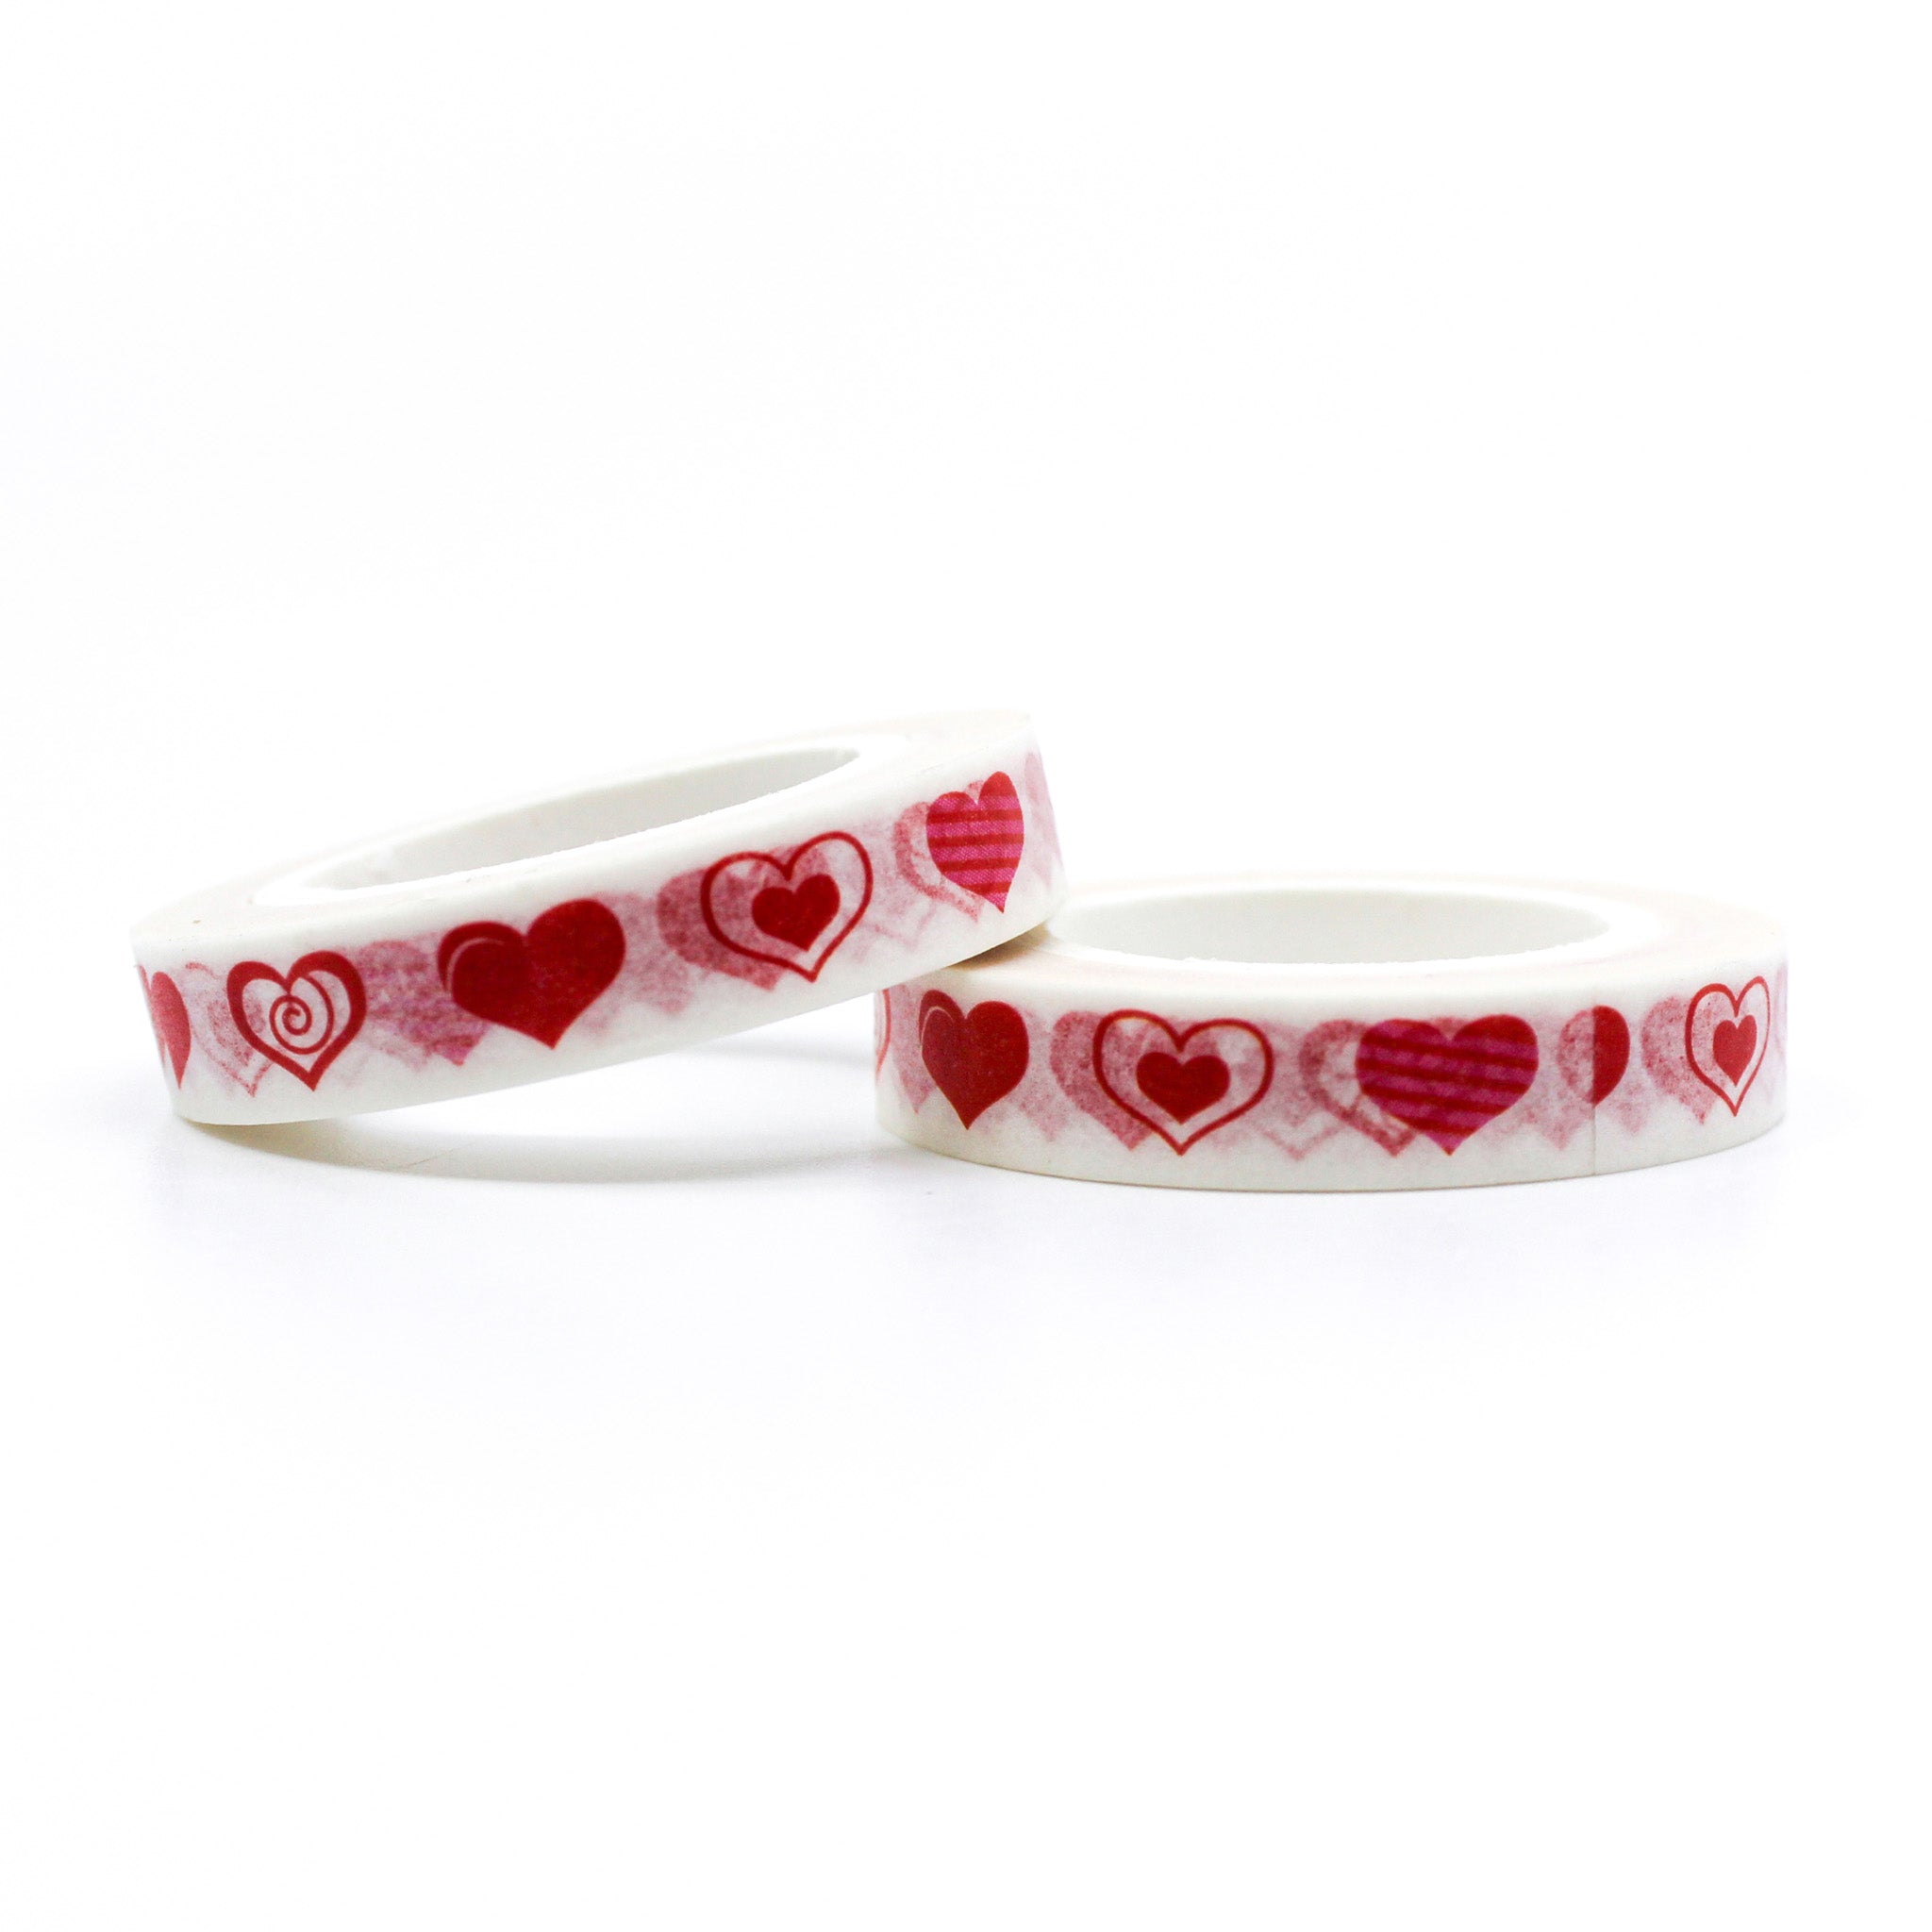 Narrow Red heart patterned washi tape. Perfect for valentines, wedding, and planner and journaling family love. This tape is sold at BBB Supplies Washi Tape Shop.